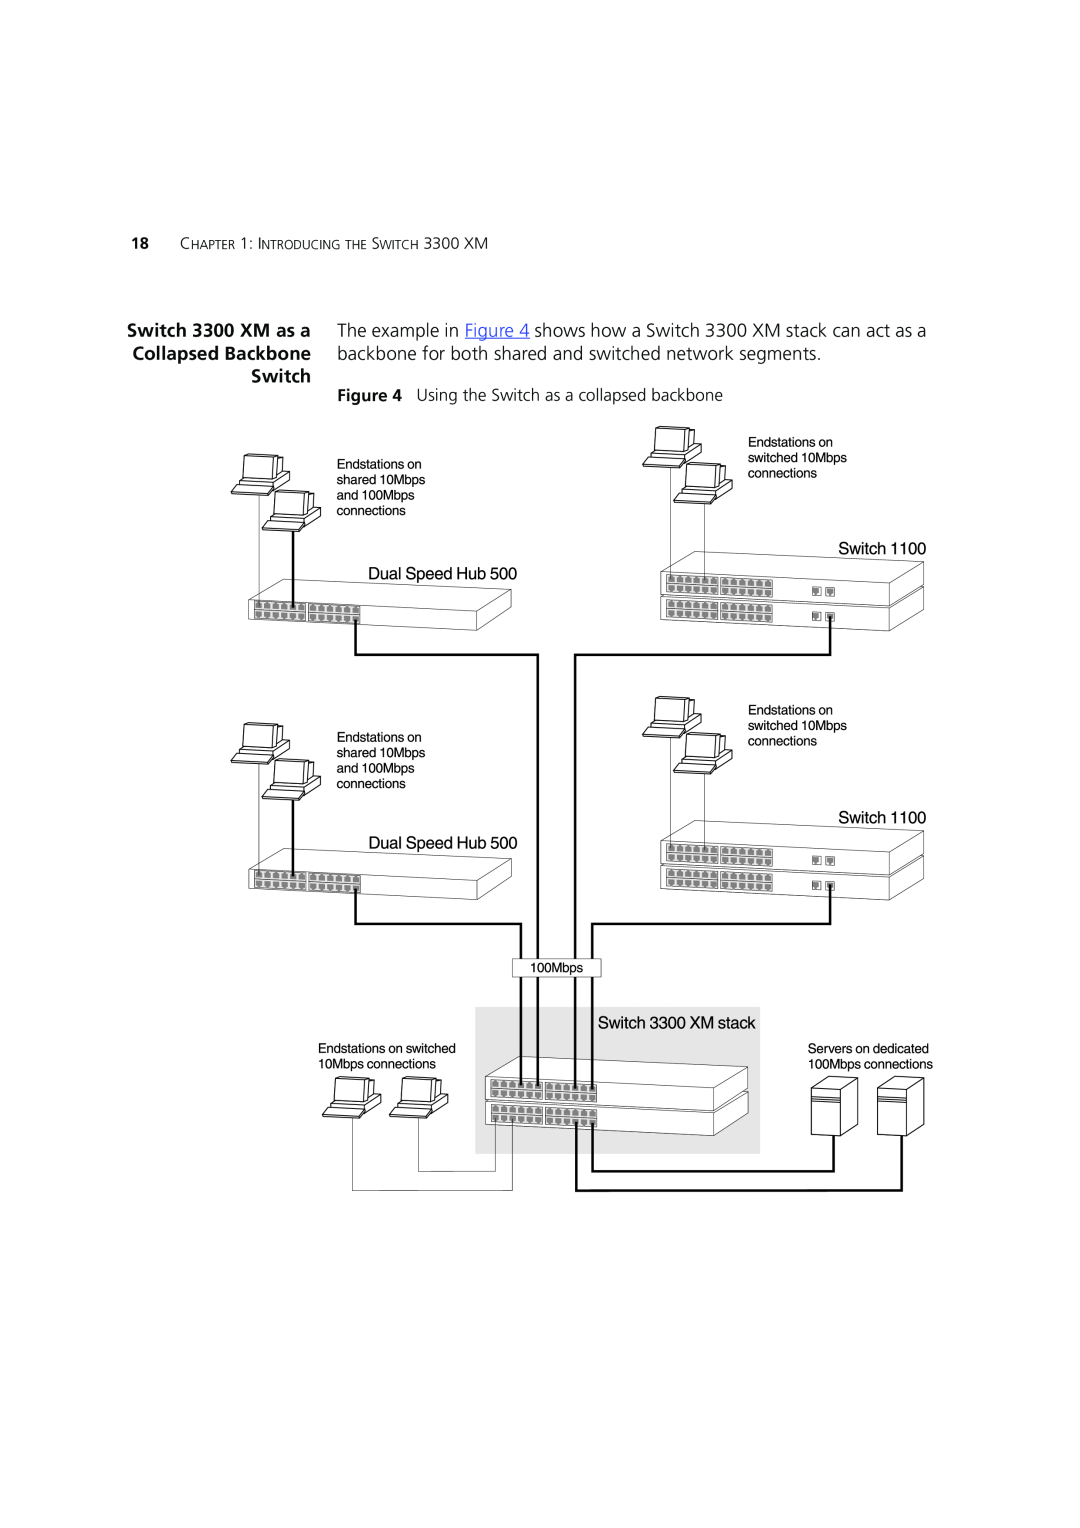 3Com DUA1698 manual Using the Switch as a collapsed backbone, INTRODUCING THE SWITCH 3300 XM 